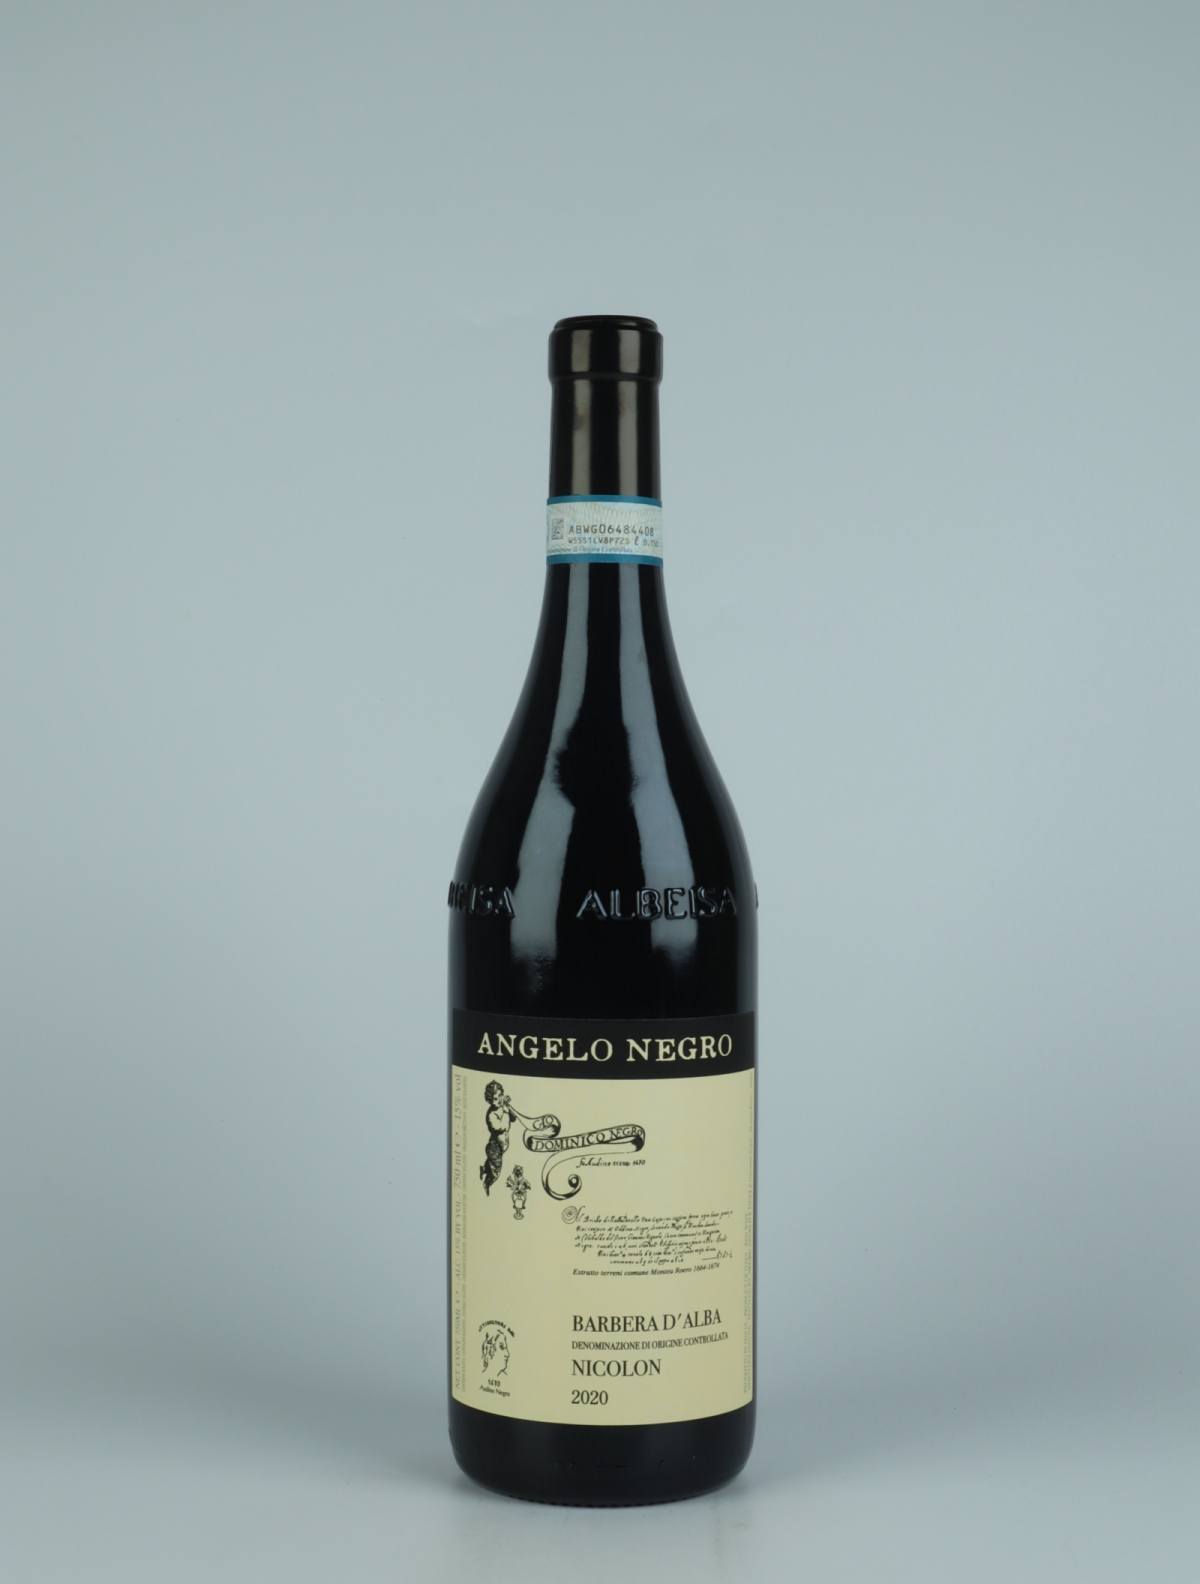 A bottle 2020 Barbera d'Alba - Nicolon Red wine from Angelo Negro, Piedmont in Italy